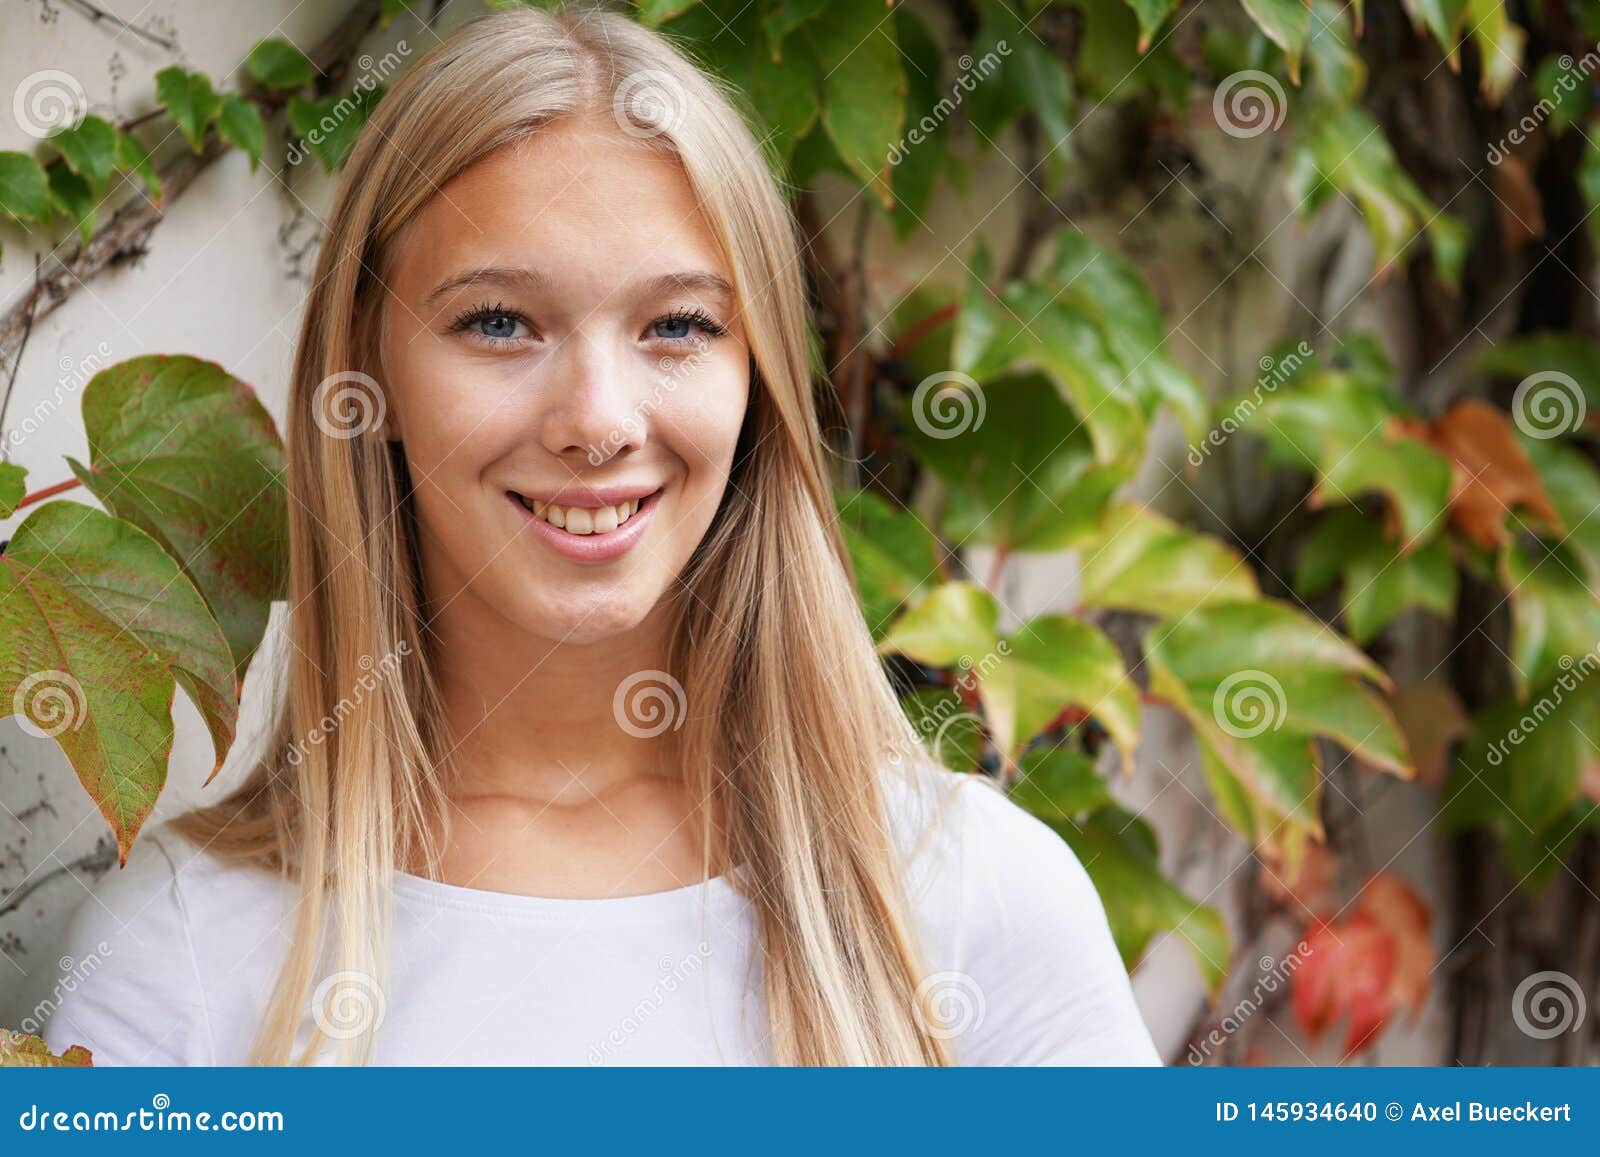 smiling young woman against ivy-clad wall